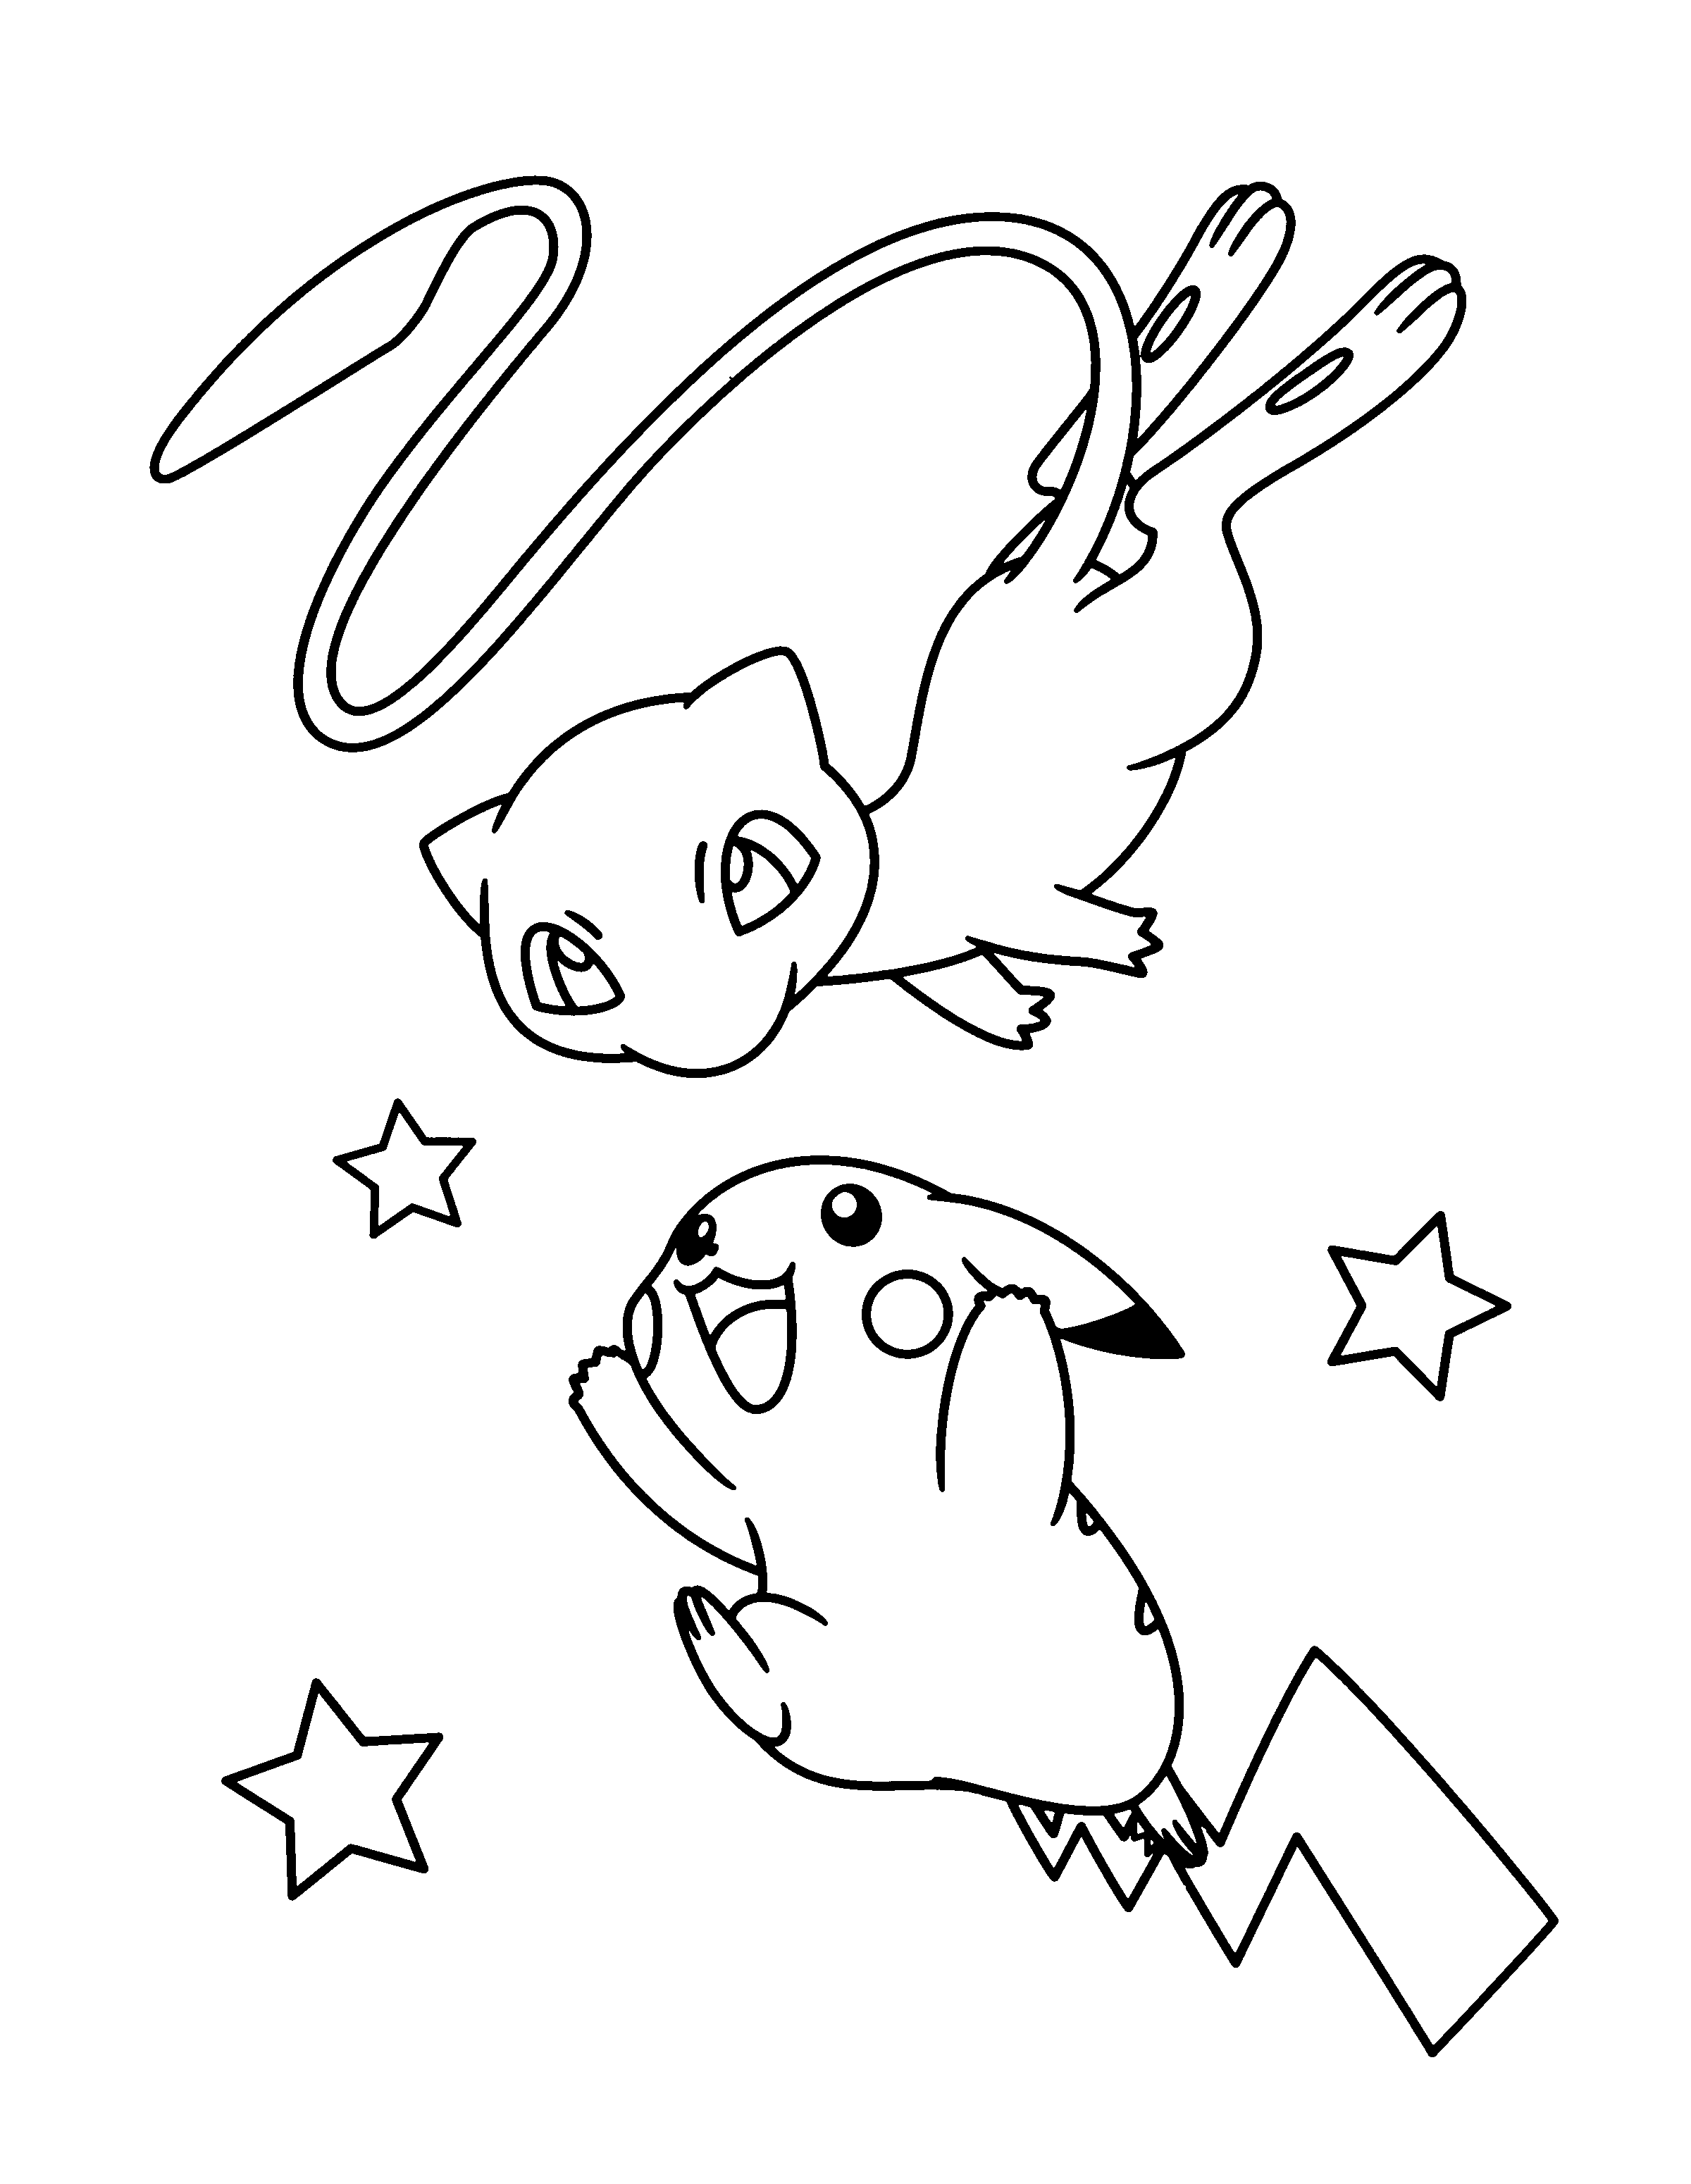 pikachu and mew coloring pages